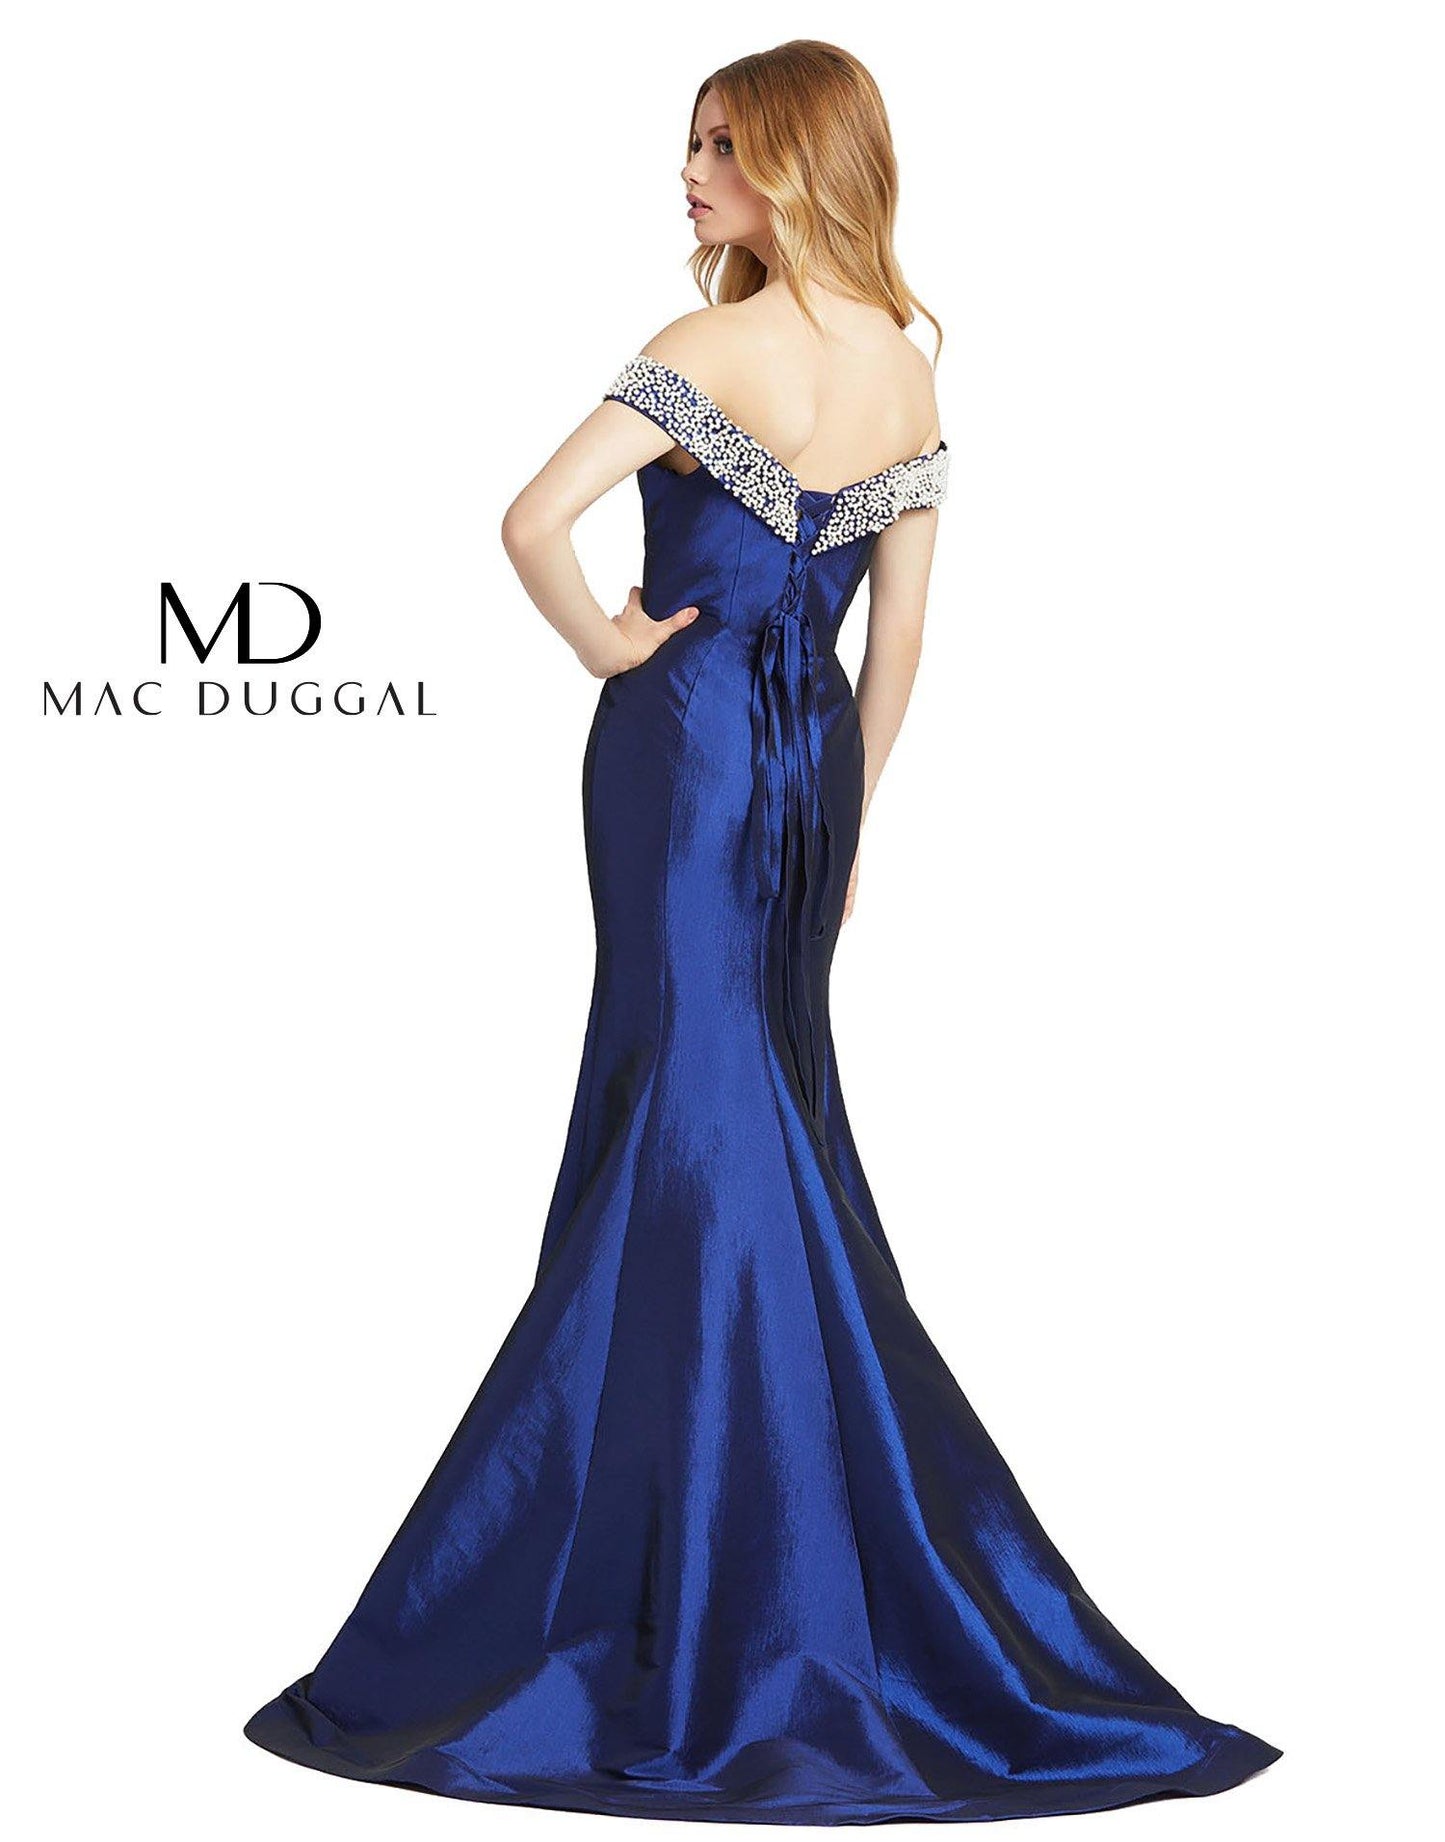 Mac Duggal Prom Long Mermaid Evening Gown 66900L - The Dress Outlet